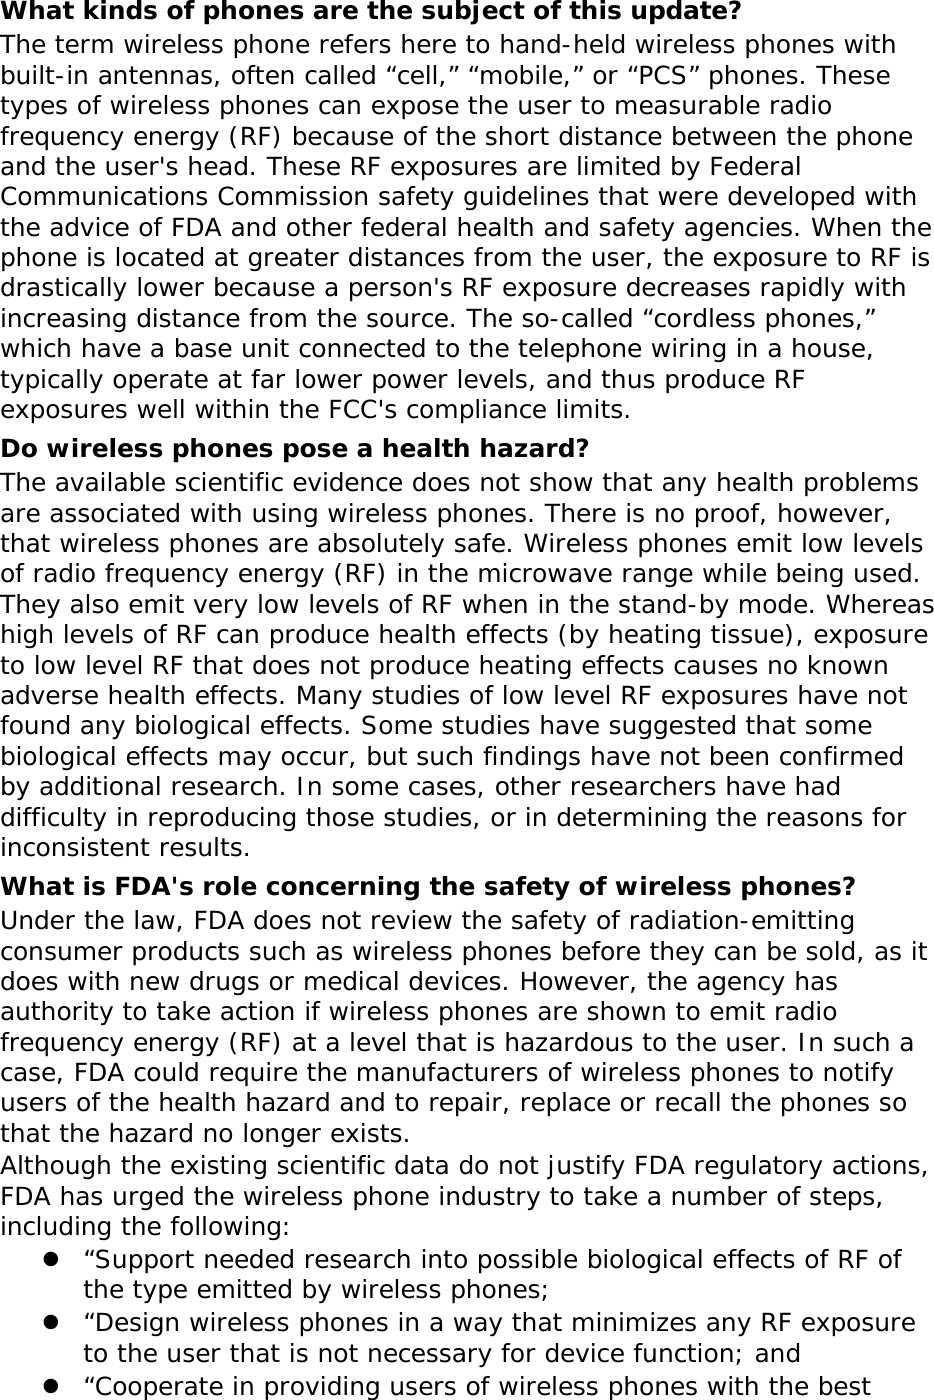 What kinds of phones are the subject of this update? The term wireless phone refers here to hand-held wireless phones with built-in antennas, often called “cell,” “mobile,” or “PCS” phones. These types of wireless phones can expose the user to measurable radio frequency energy (RF) because of the short distance between the phone and the user&apos;s head. These RF exposures are limited by Federal Communications Commission safety guidelines that were developed with the advice of FDA and other federal health and safety agencies. When the phone is located at greater distances from the user, the exposure to RF is drastically lower because a person&apos;s RF exposure decreases rapidly with increasing distance from the source. The so-called “cordless phones,” which have a base unit connected to the telephone wiring in a house, typically operate at far lower power levels, and thus produce RF exposures well within the FCC&apos;s compliance limits. Do wireless phones pose a health hazard? The available scientific evidence does not show that any health problems are associated with using wireless phones. There is no proof, however, that wireless phones are absolutely safe. Wireless phones emit low levels of radio frequency energy (RF) in the microwave range while being used. They also emit very low levels of RF when in the stand-by mode. Whereas high levels of RF can produce health effects (by heating tissue), exposure to low level RF that does not produce heating effects causes no known adverse health effects. Many studies of low level RF exposures have not found any biological effects. Some studies have suggested that some biological effects may occur, but such findings have not been confirmed by additional research. In some cases, other researchers have had difficulty in reproducing those studies, or in determining the reasons for inconsistent results. What is FDA&apos;s role concerning the safety of wireless phones? Under the law, FDA does not review the safety of radiation-emitting consumer products such as wireless phones before they can be sold, as it does with new drugs or medical devices. However, the agency has authority to take action if wireless phones are shown to emit radio frequency energy (RF) at a level that is hazardous to the user. In such a case, FDA could require the manufacturers of wireless phones to notify users of the health hazard and to repair, replace or recall the phones so that the hazard no longer exists. Although the existing scientific data do not justify FDA regulatory actions, FDA has urged the wireless phone industry to take a number of steps, including the following: z “Support needed research into possible biological effects of RF of the type emitted by wireless phones; z “Design wireless phones in a way that minimizes any RF exposure to the user that is not necessary for device function; and z “Cooperate in providing users of wireless phones with the best 